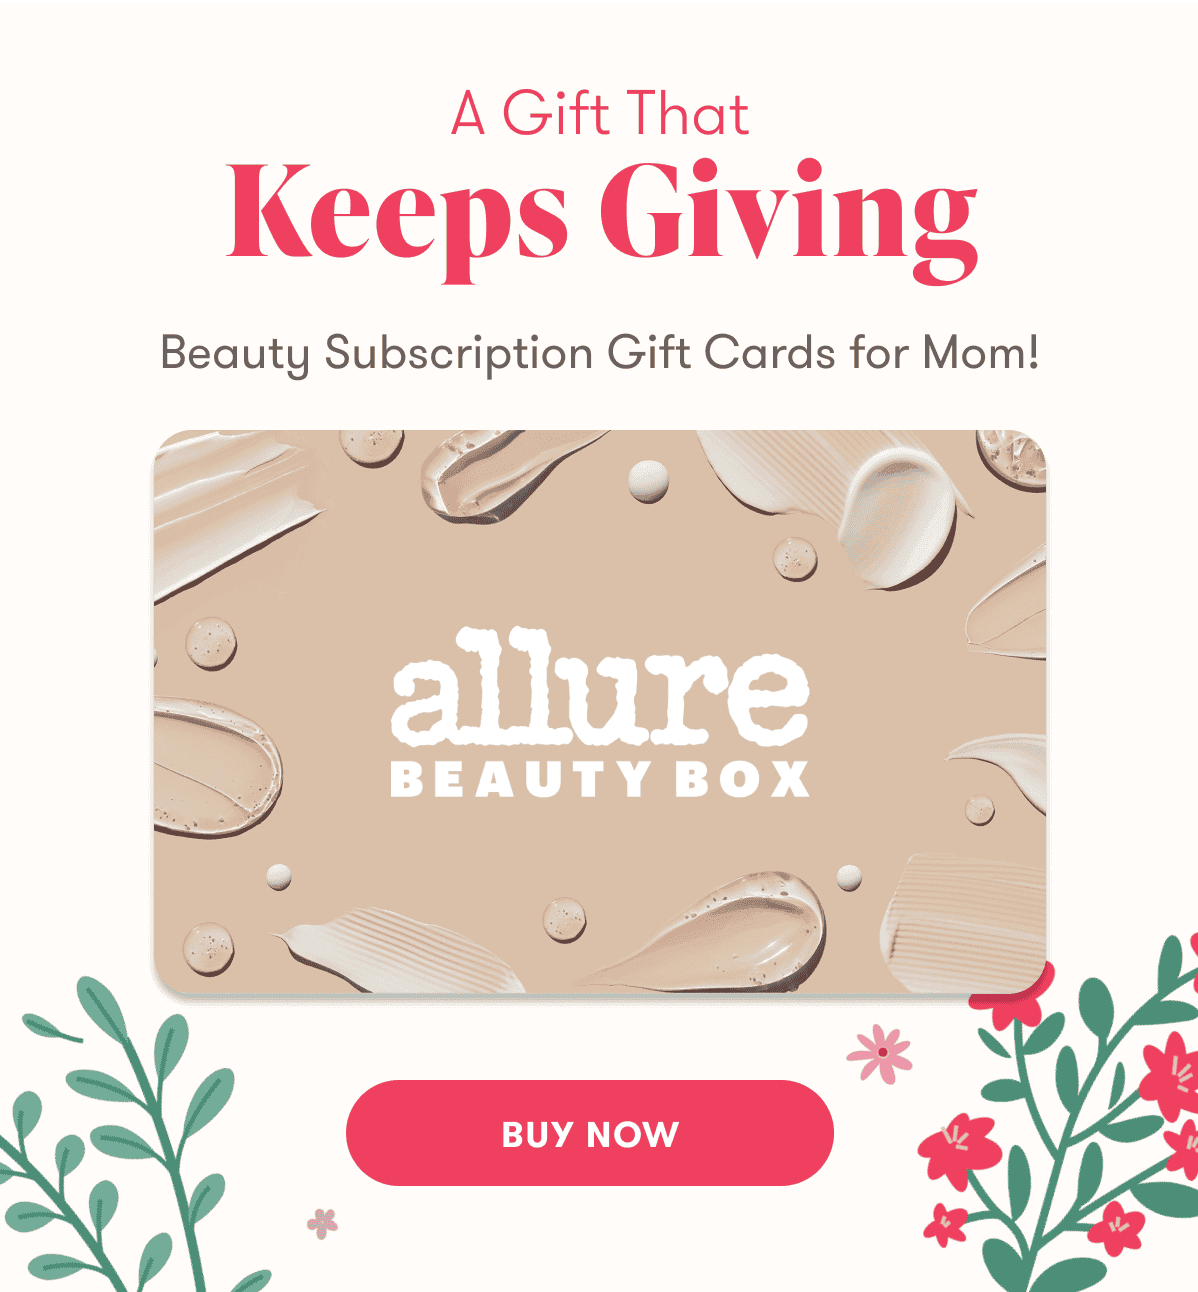 A Gift That Keeps Giving. Beauty Subscription Gift Cards for Mom! Buy now.